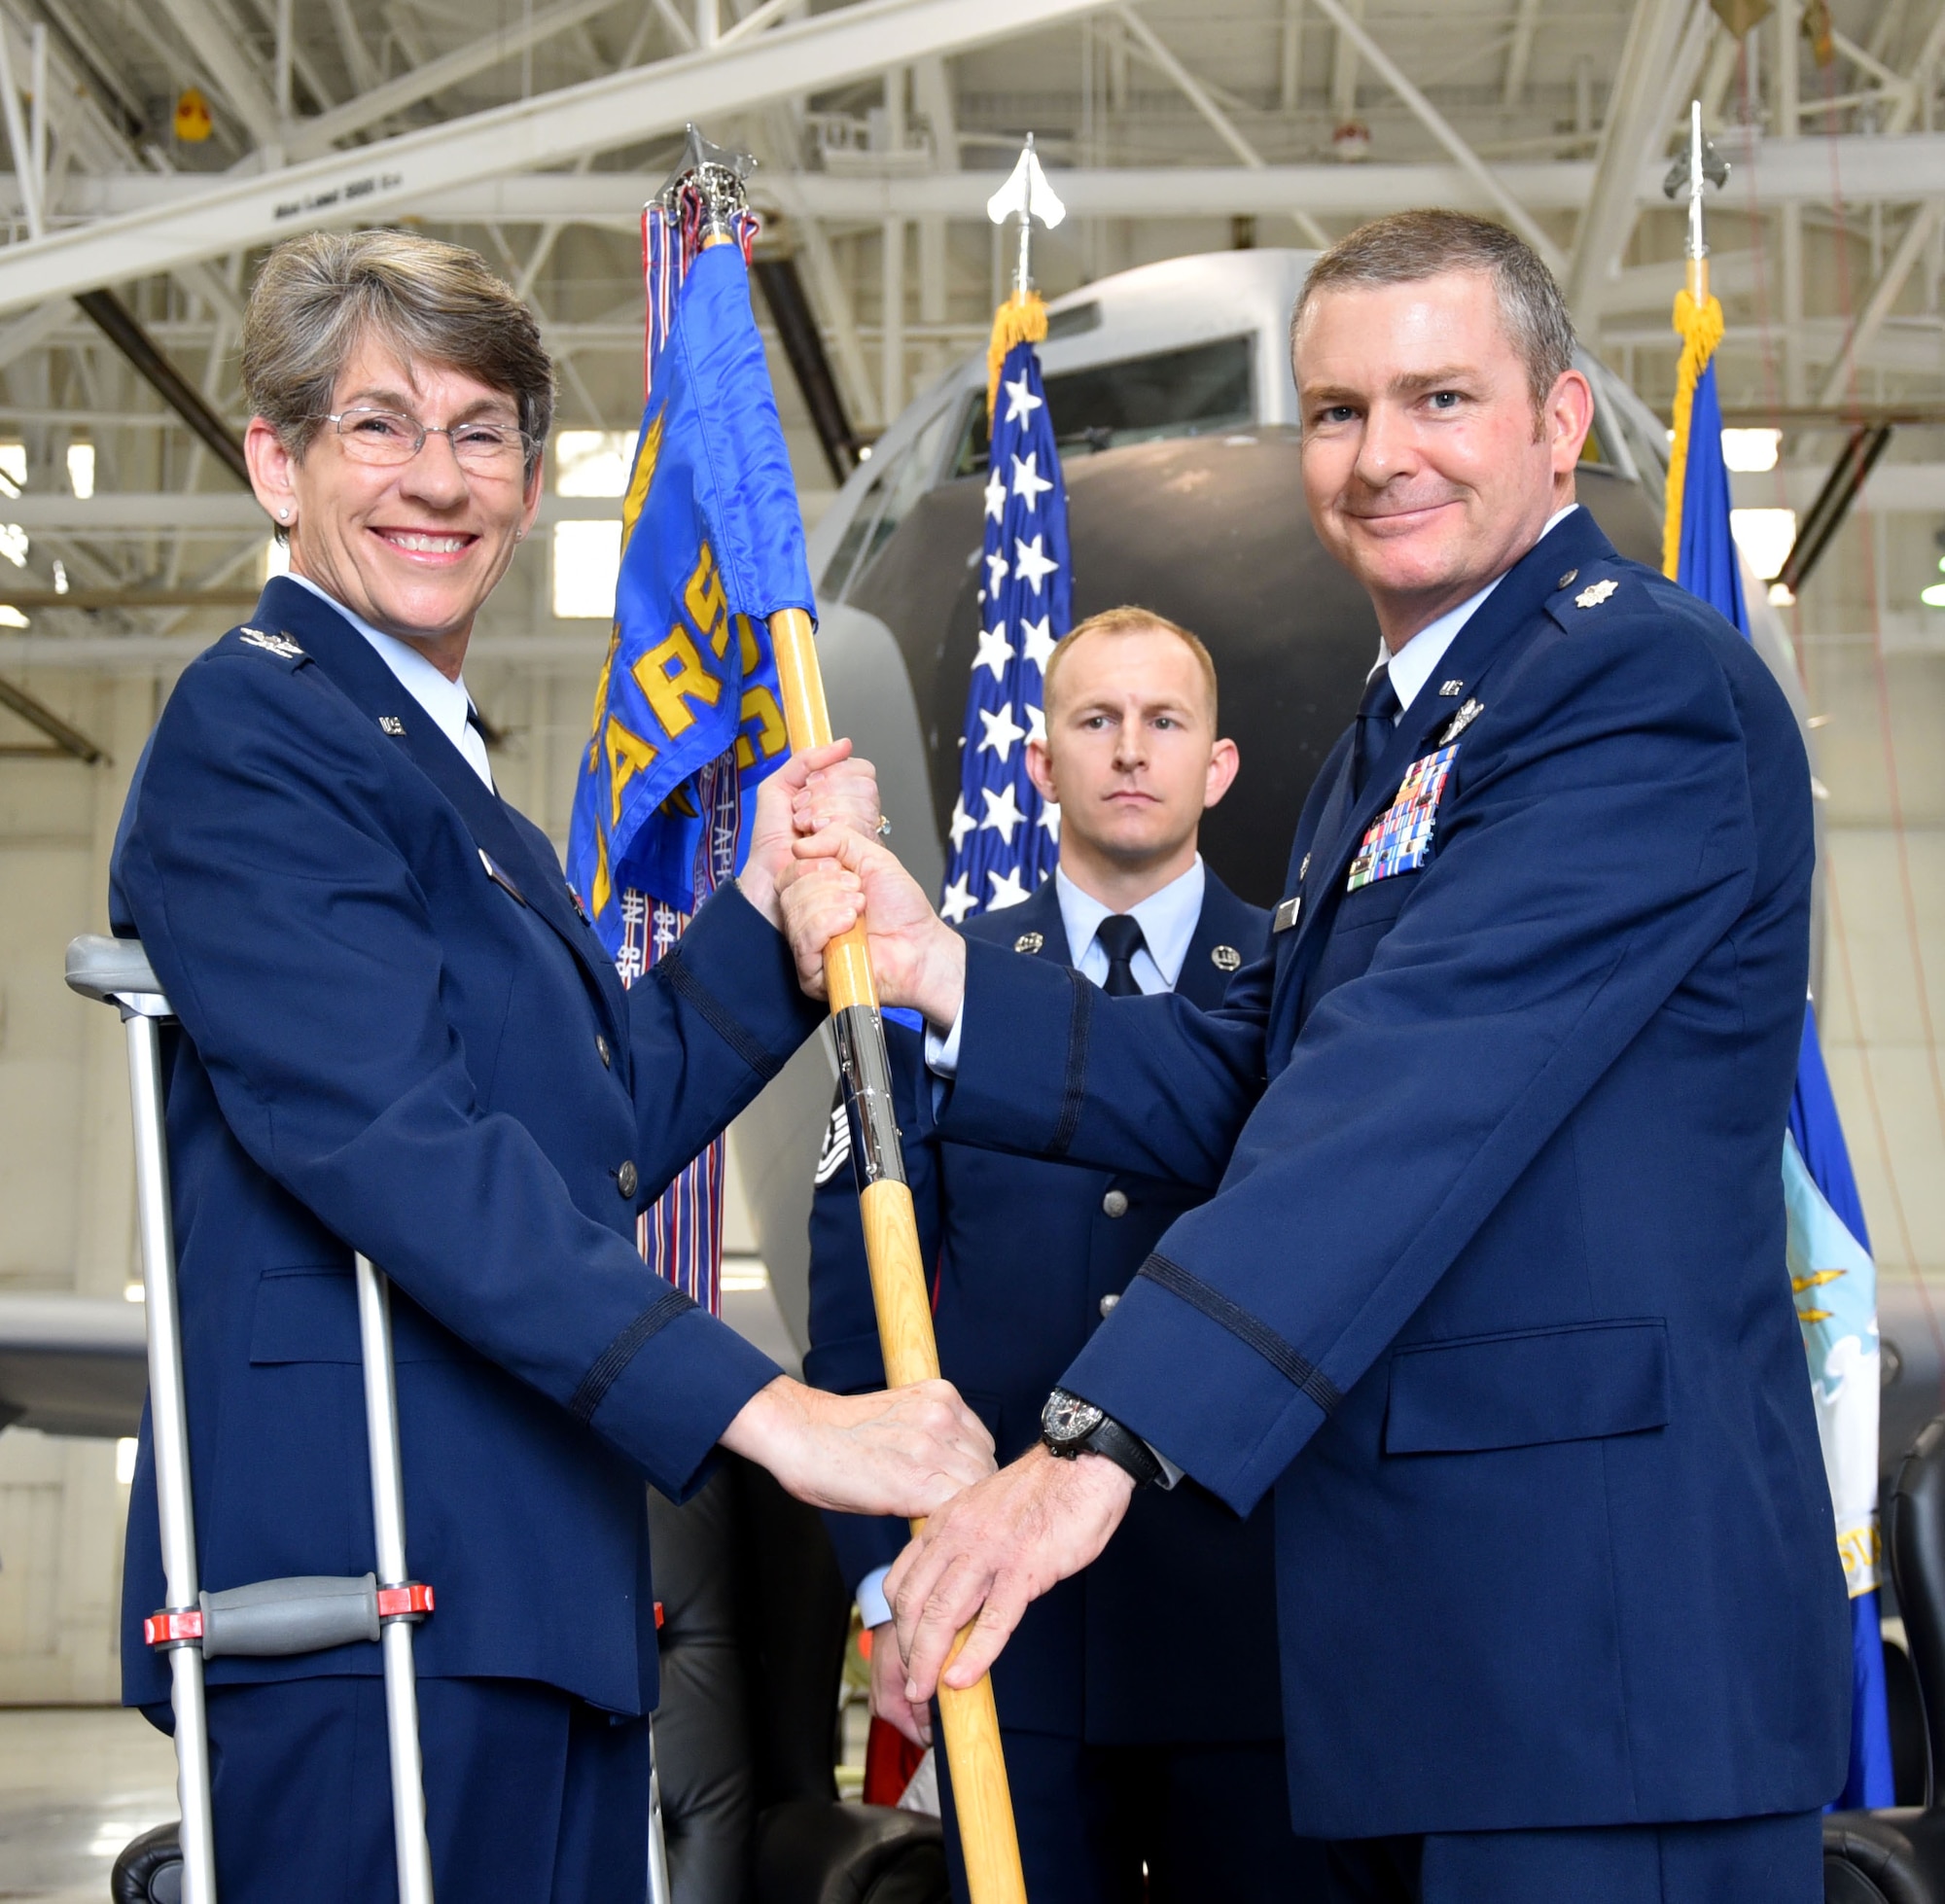 (Left to right) Col. Caroline Evernham, 931st Operations Group commander, hands the guidon to Lt. Col. Terry McGee, 924th Air Refueling Squadron incoming commander, during a standup and assumption of command ceremony April 2, 2017, McConnell Air Force Base, Kan.  McGee is the first commander of the 924 ARS since the unit was inactivated at Castle Air Force Base, Calif., in 1992. The 924 ARS at McConnell is the first unit in the Air Force dedicated solely to the KC-46A Pegasus.  The KC-46 is scheduled to arrive later this year.  (U.S. Air Force photo by Tech. Sgt. Abigail Klein)
